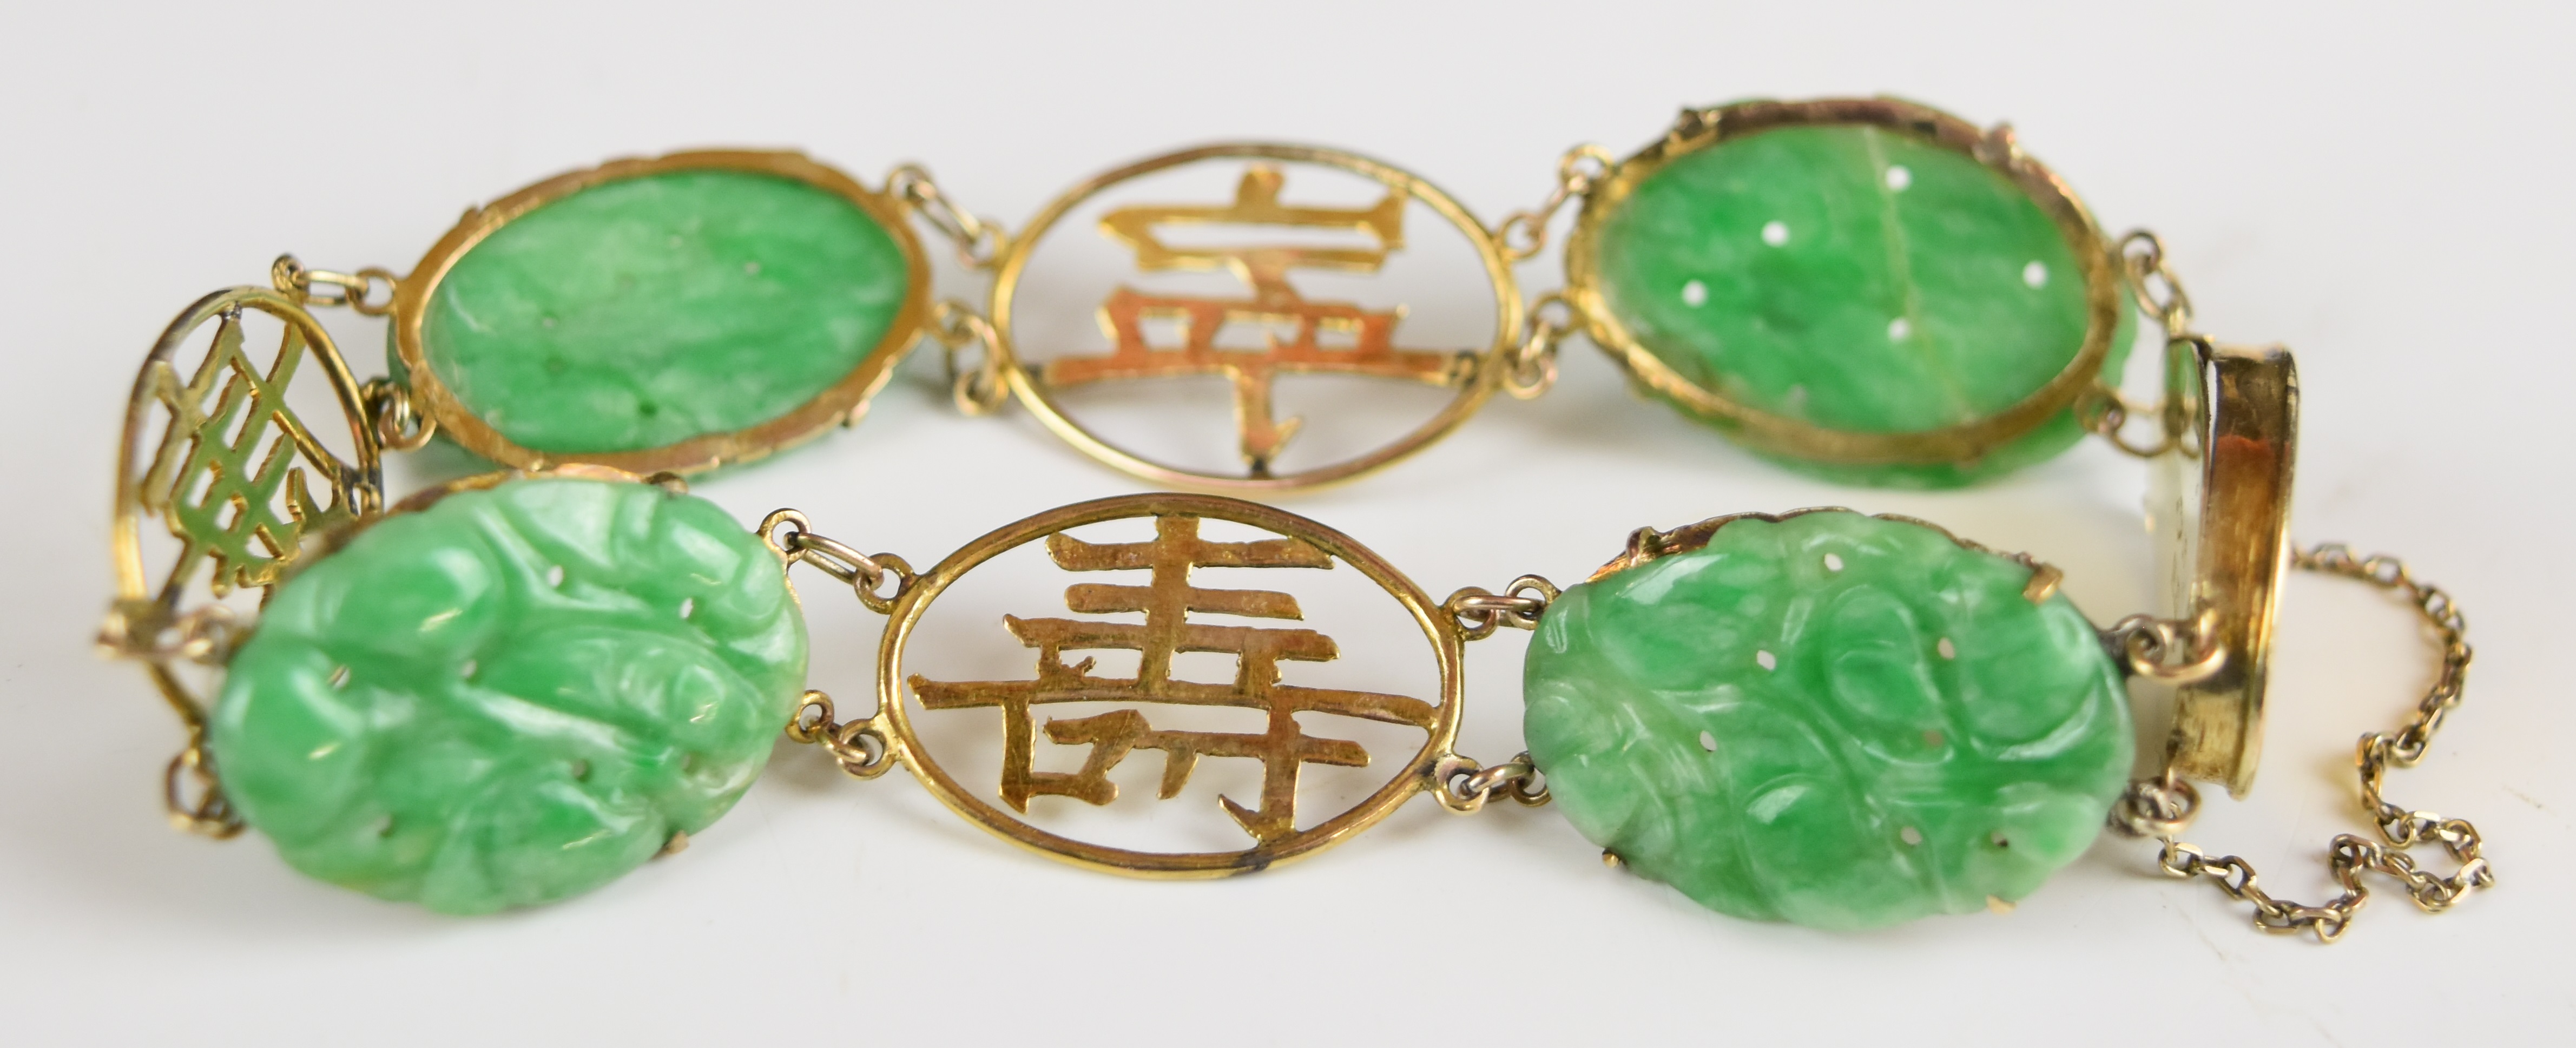 A 9k gold Chinese bracelet set with carved jadeite panels and pierced character links, 12.1g